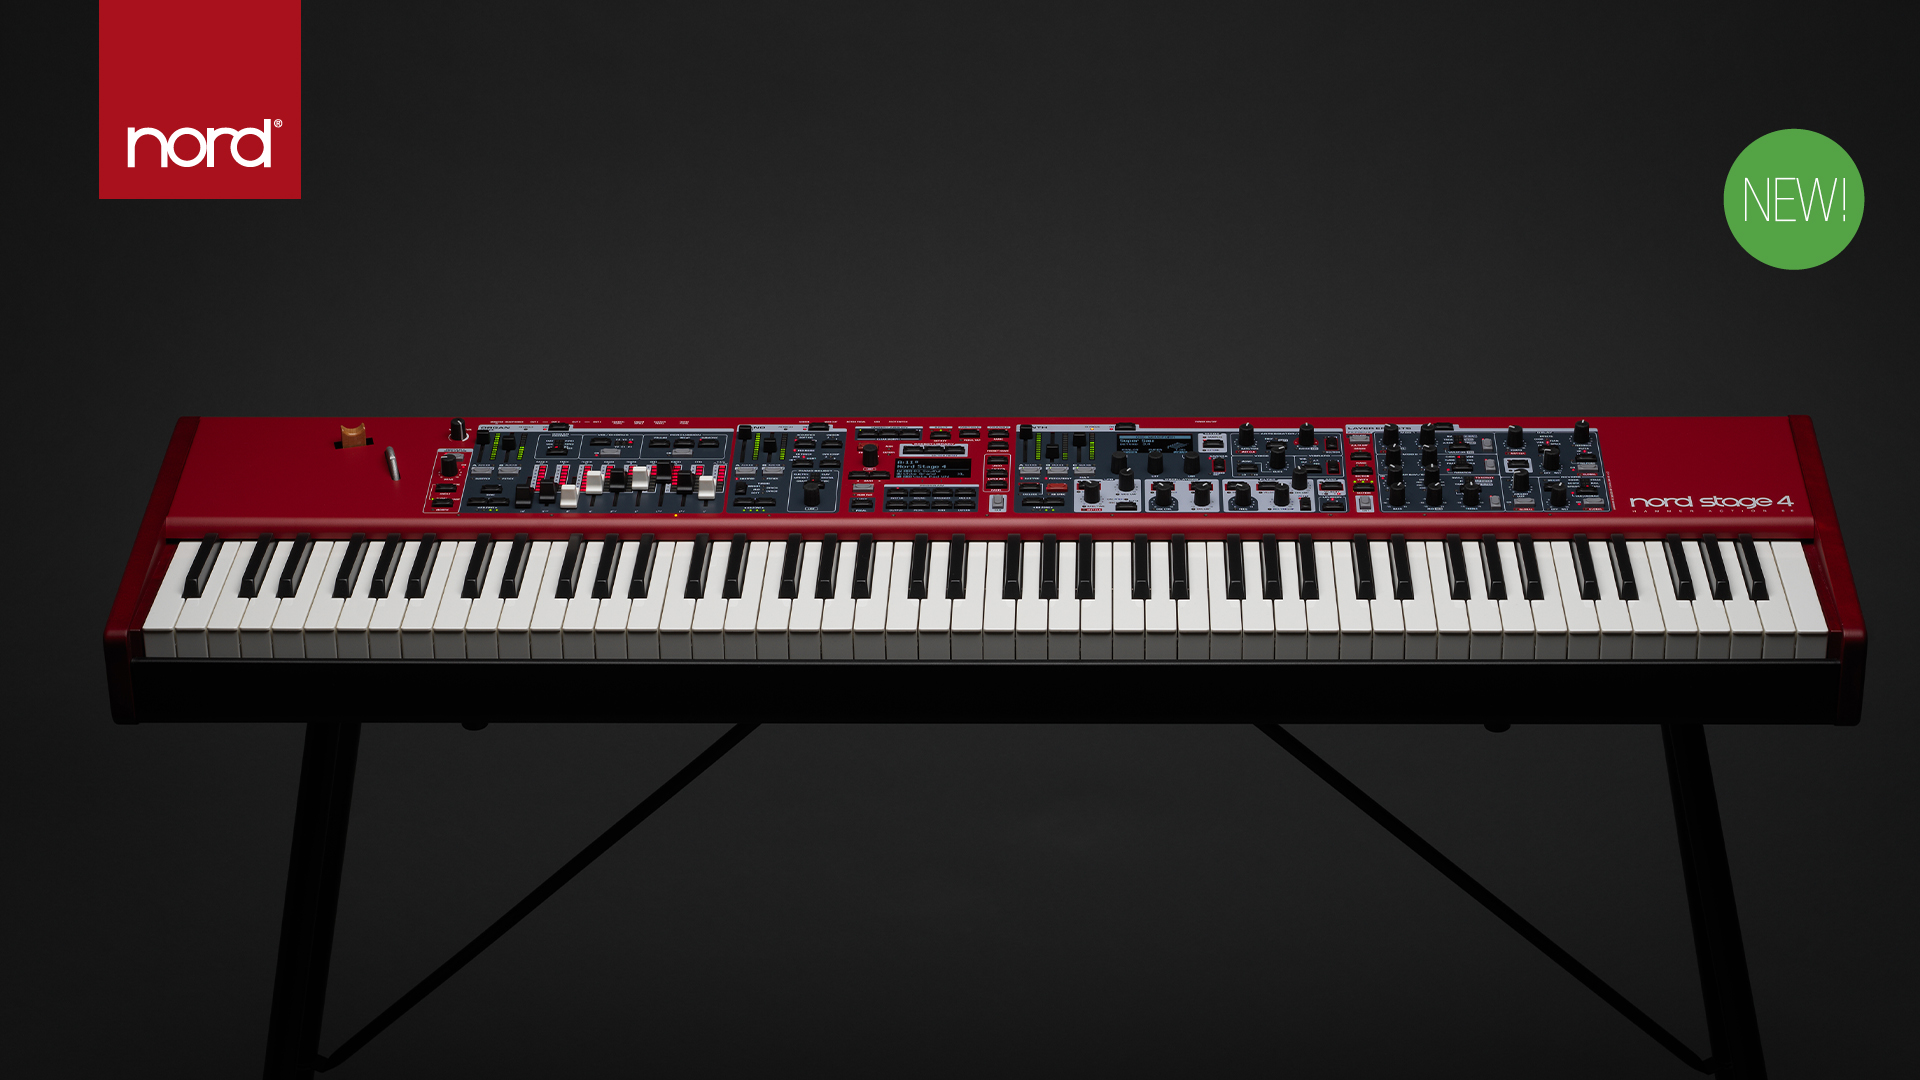 NORD STAGE 4